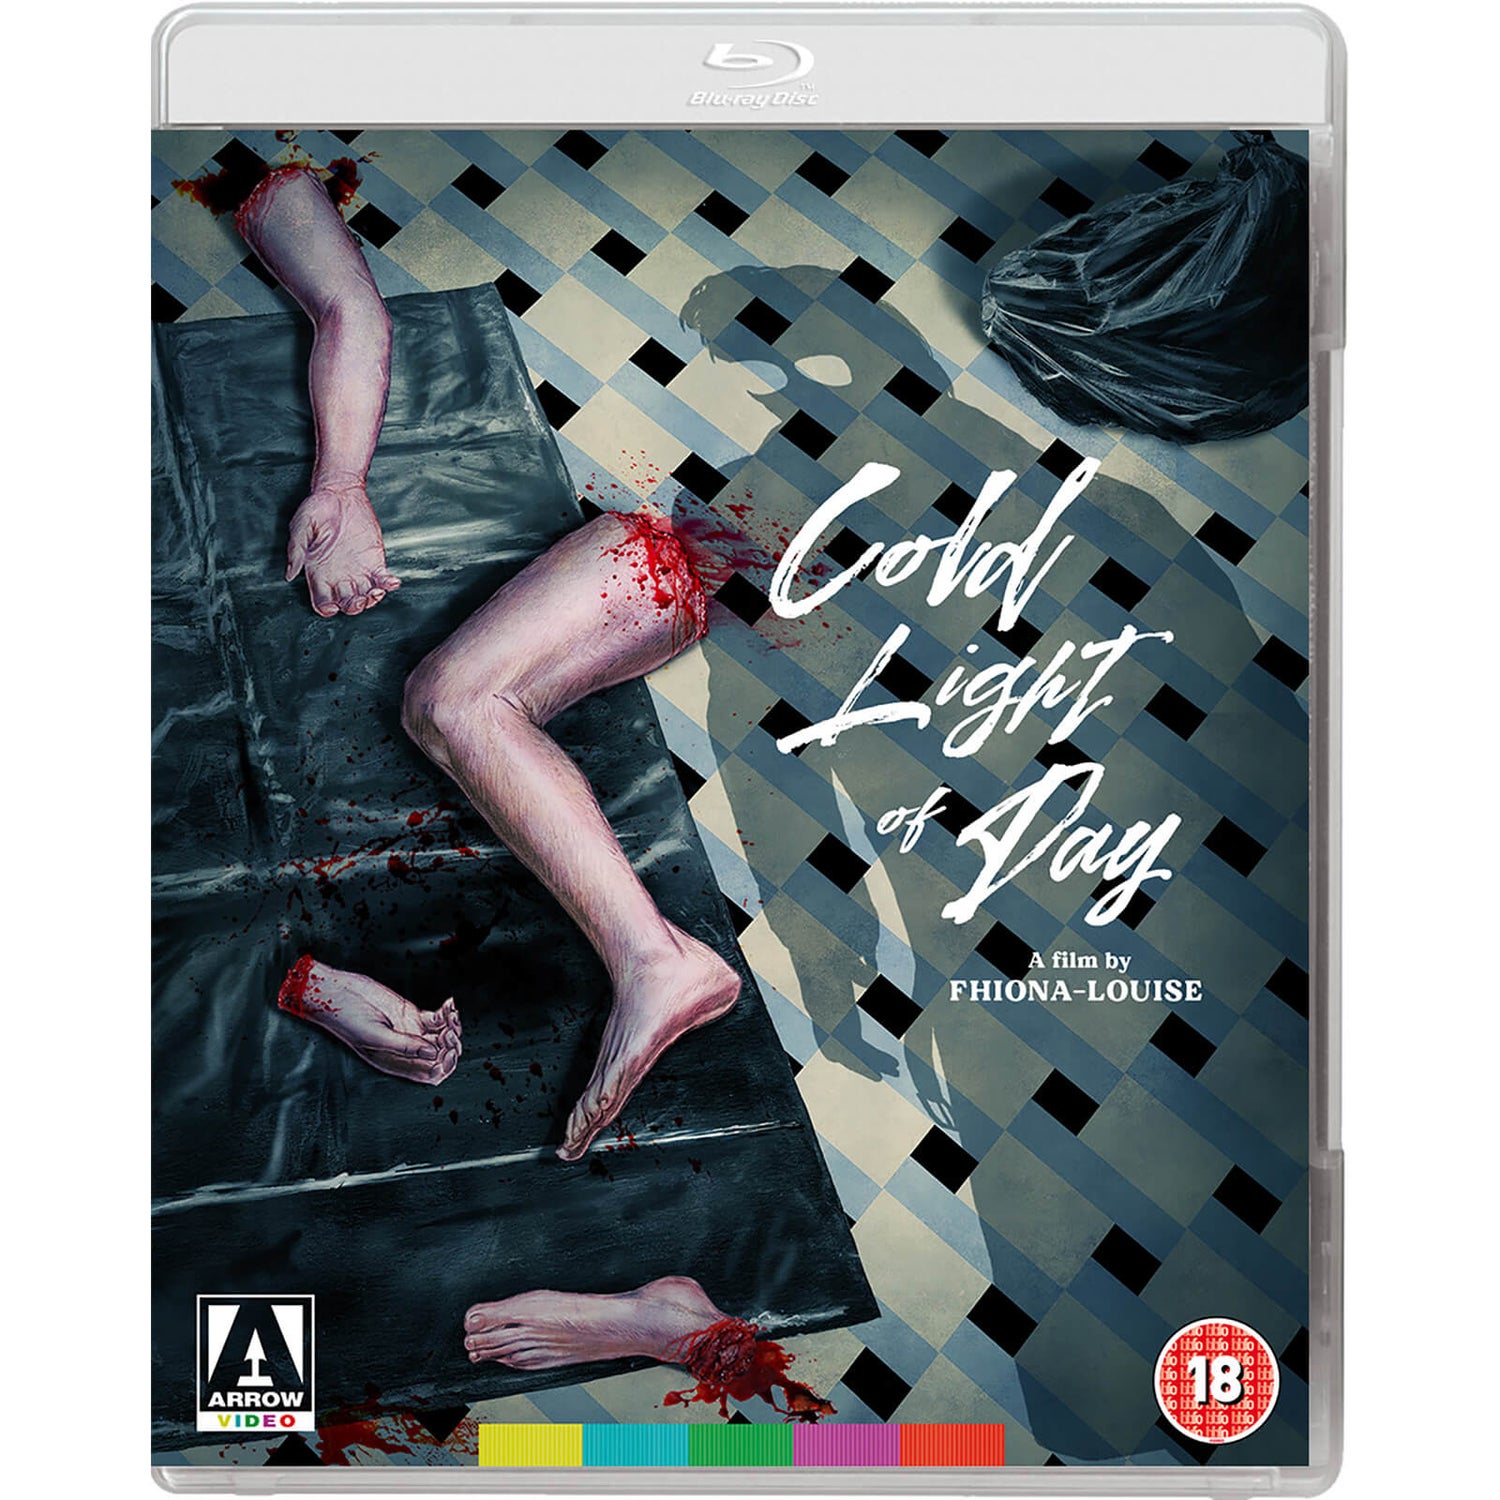 Cold Light Of Day Blu-ray